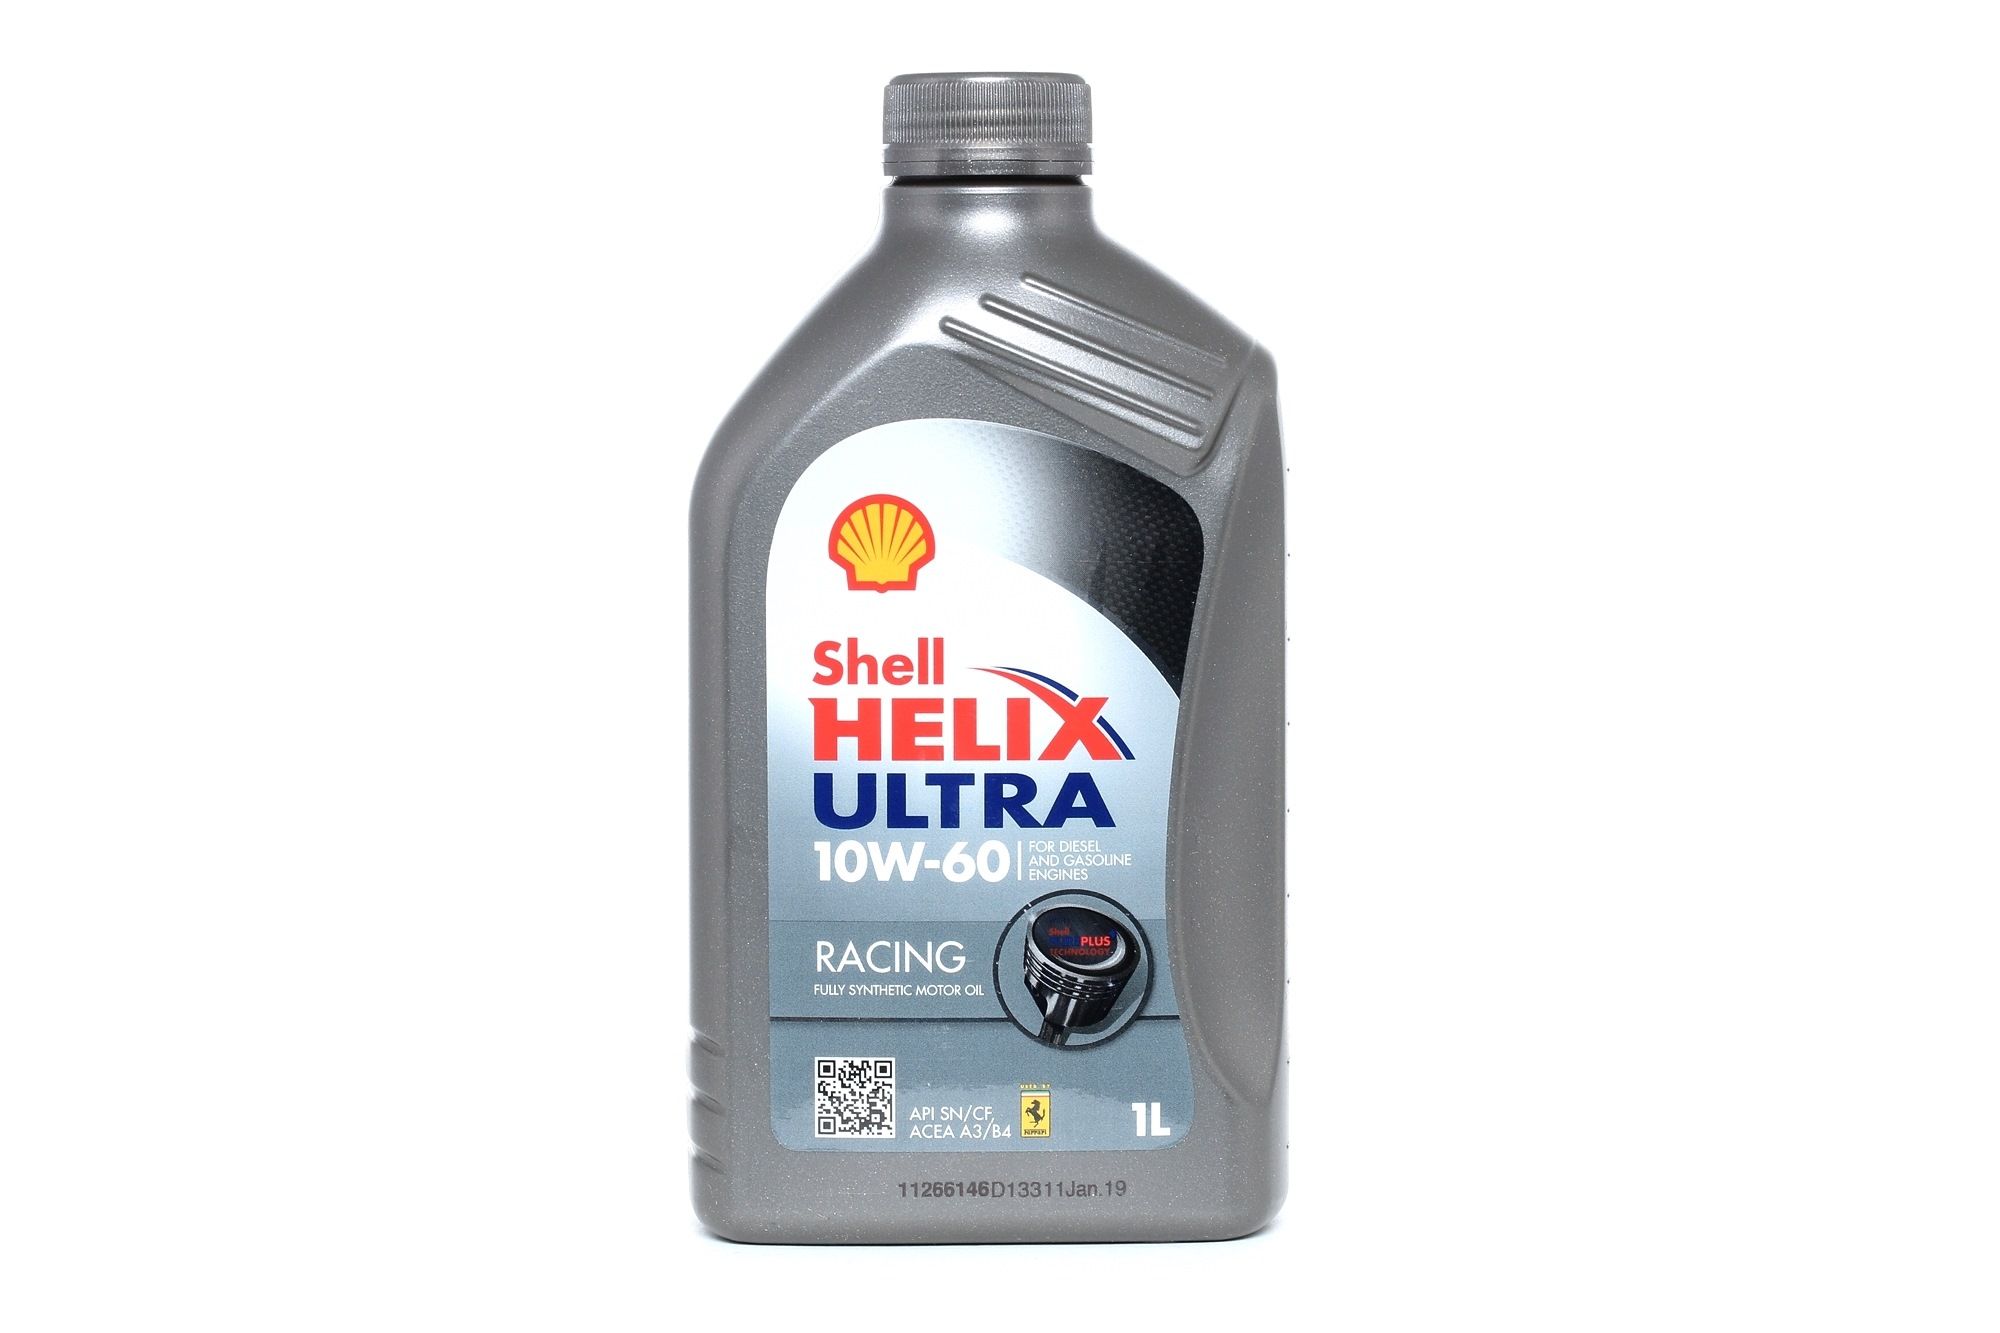 SHELL Helix, Ultra Racing 550046314 Engine oil 10W-60, 1l, Synthetic Oil